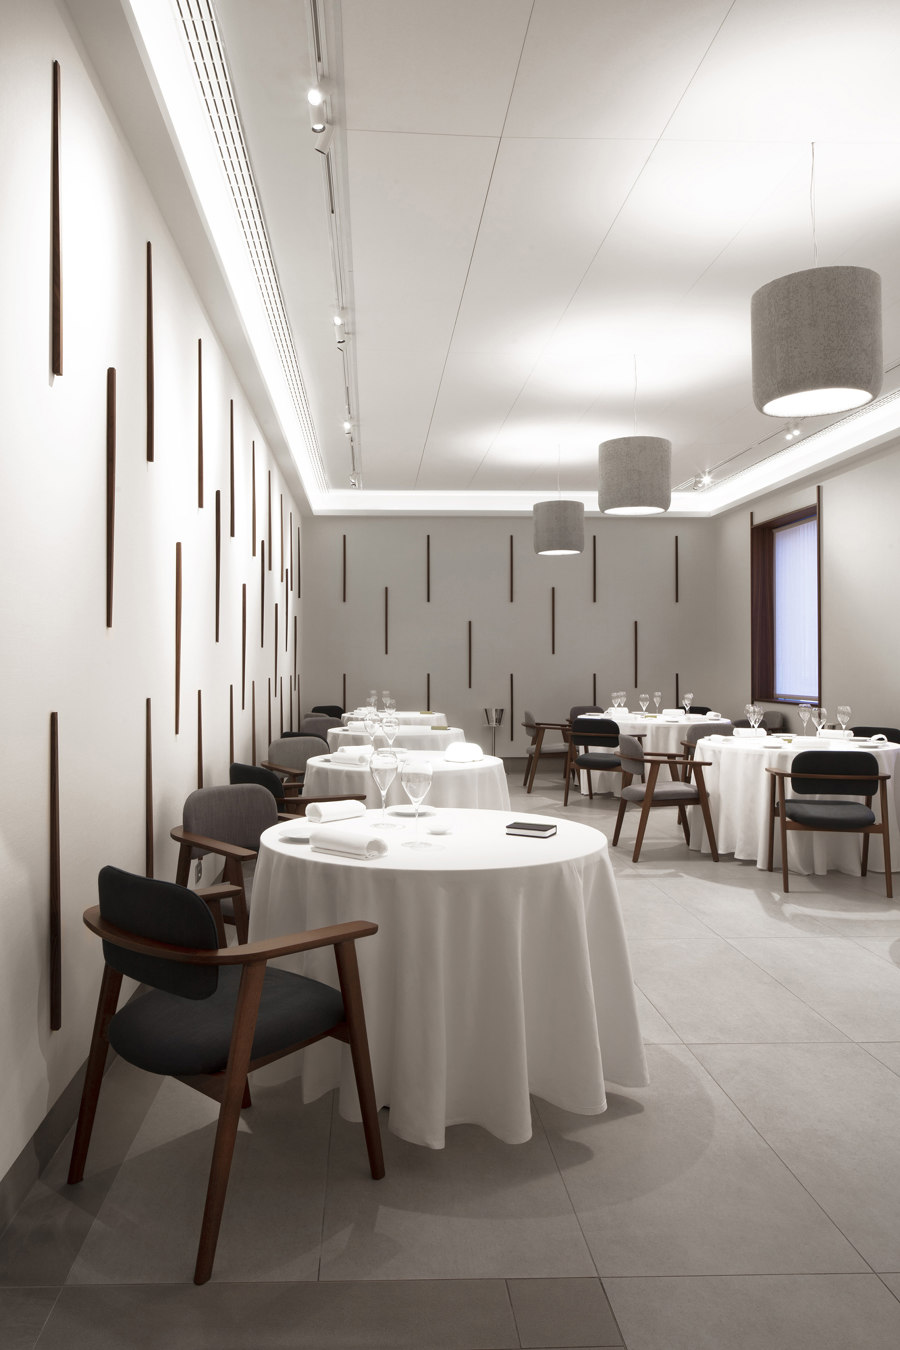 A sound and sensory experience at 2-star Michelin restaurant | Manufacturer references | BuzziSpace